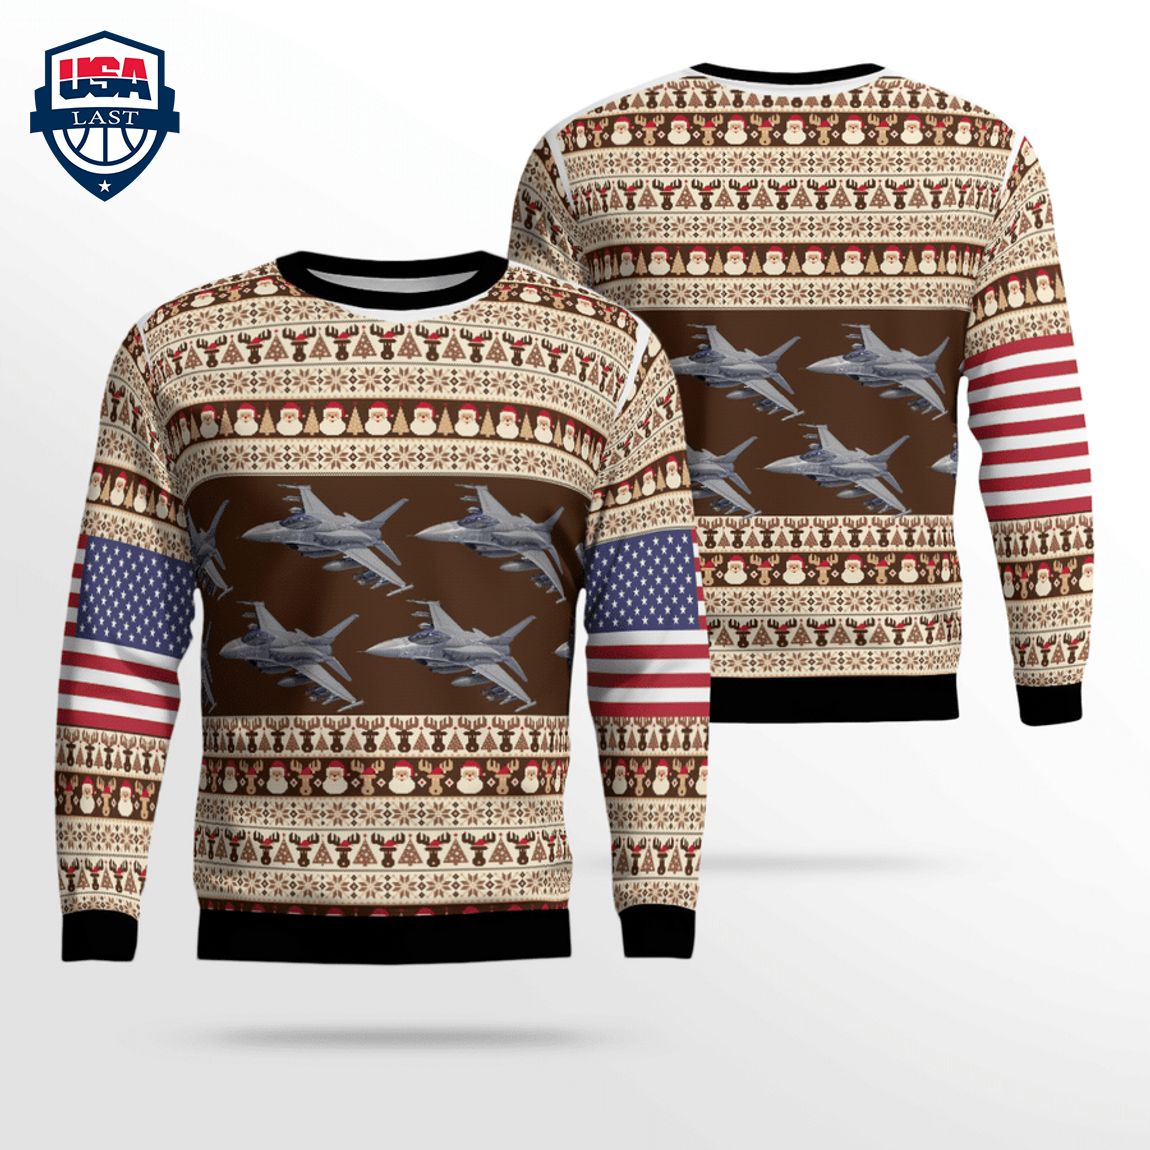 F-16 Fighting Falcon 3D Christmas Sweater